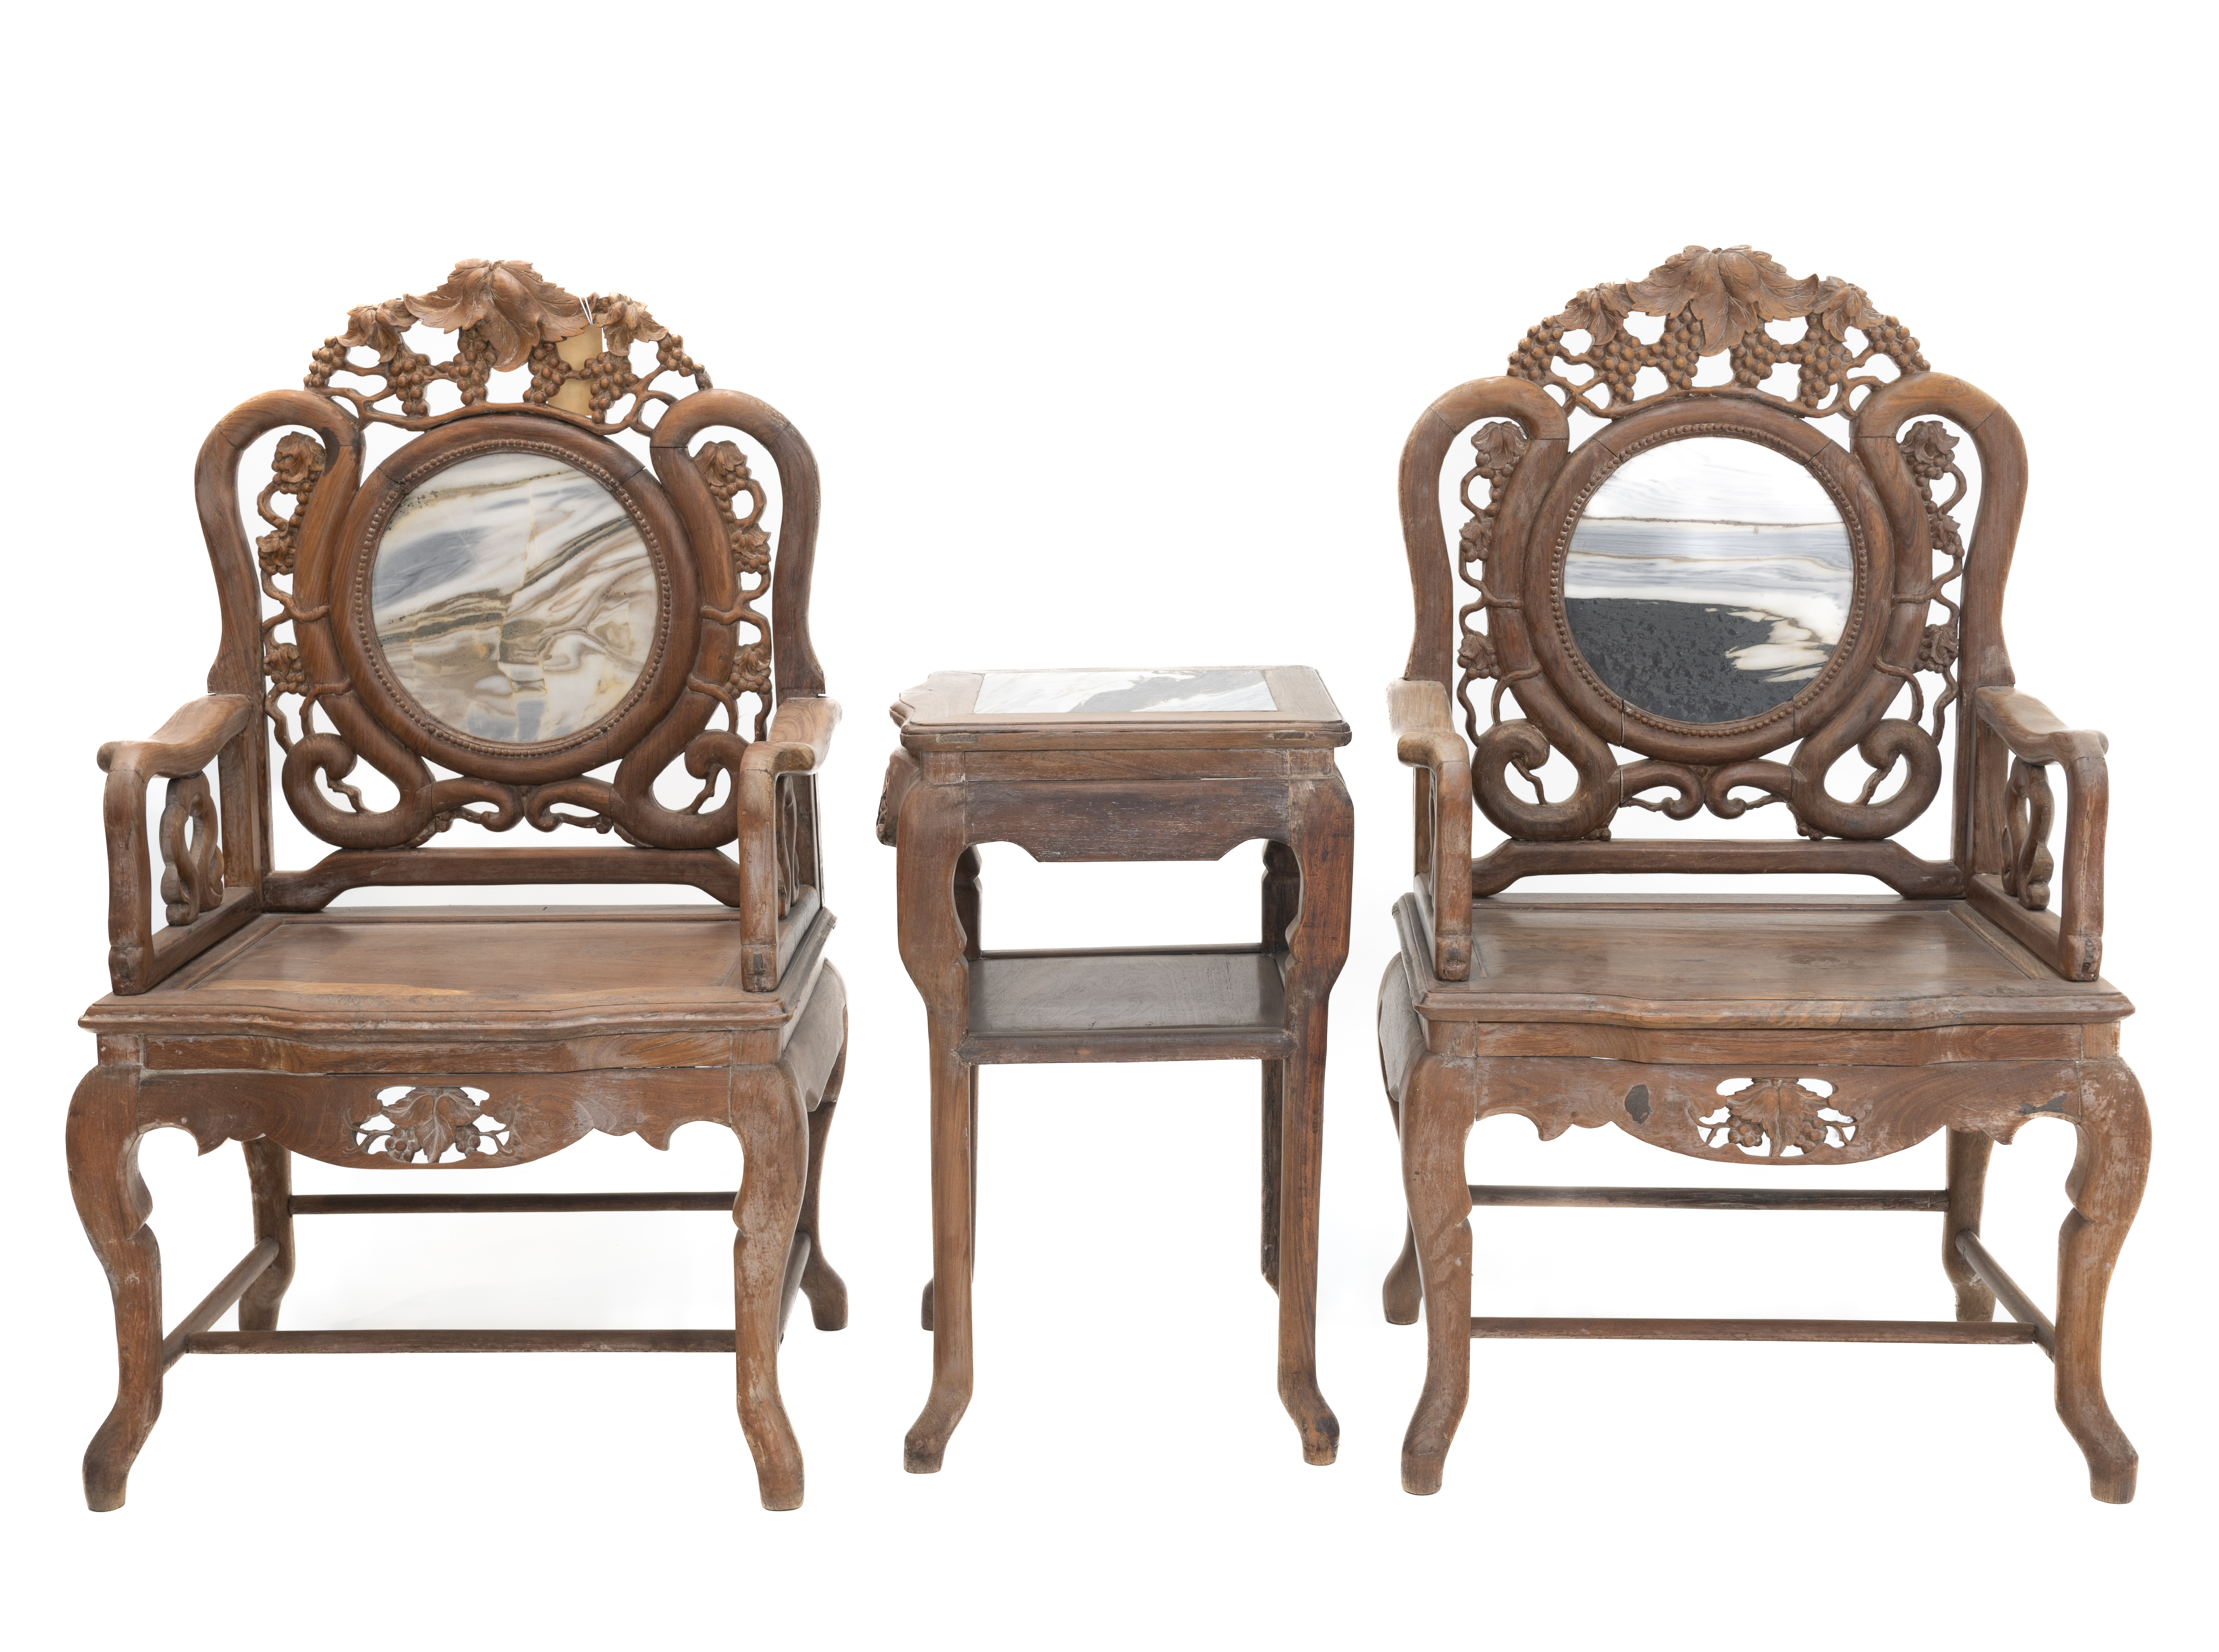 *A PAIR OF MARBLE INSET CARVED HARDWOOD ARMCHAIRS AND TABLE